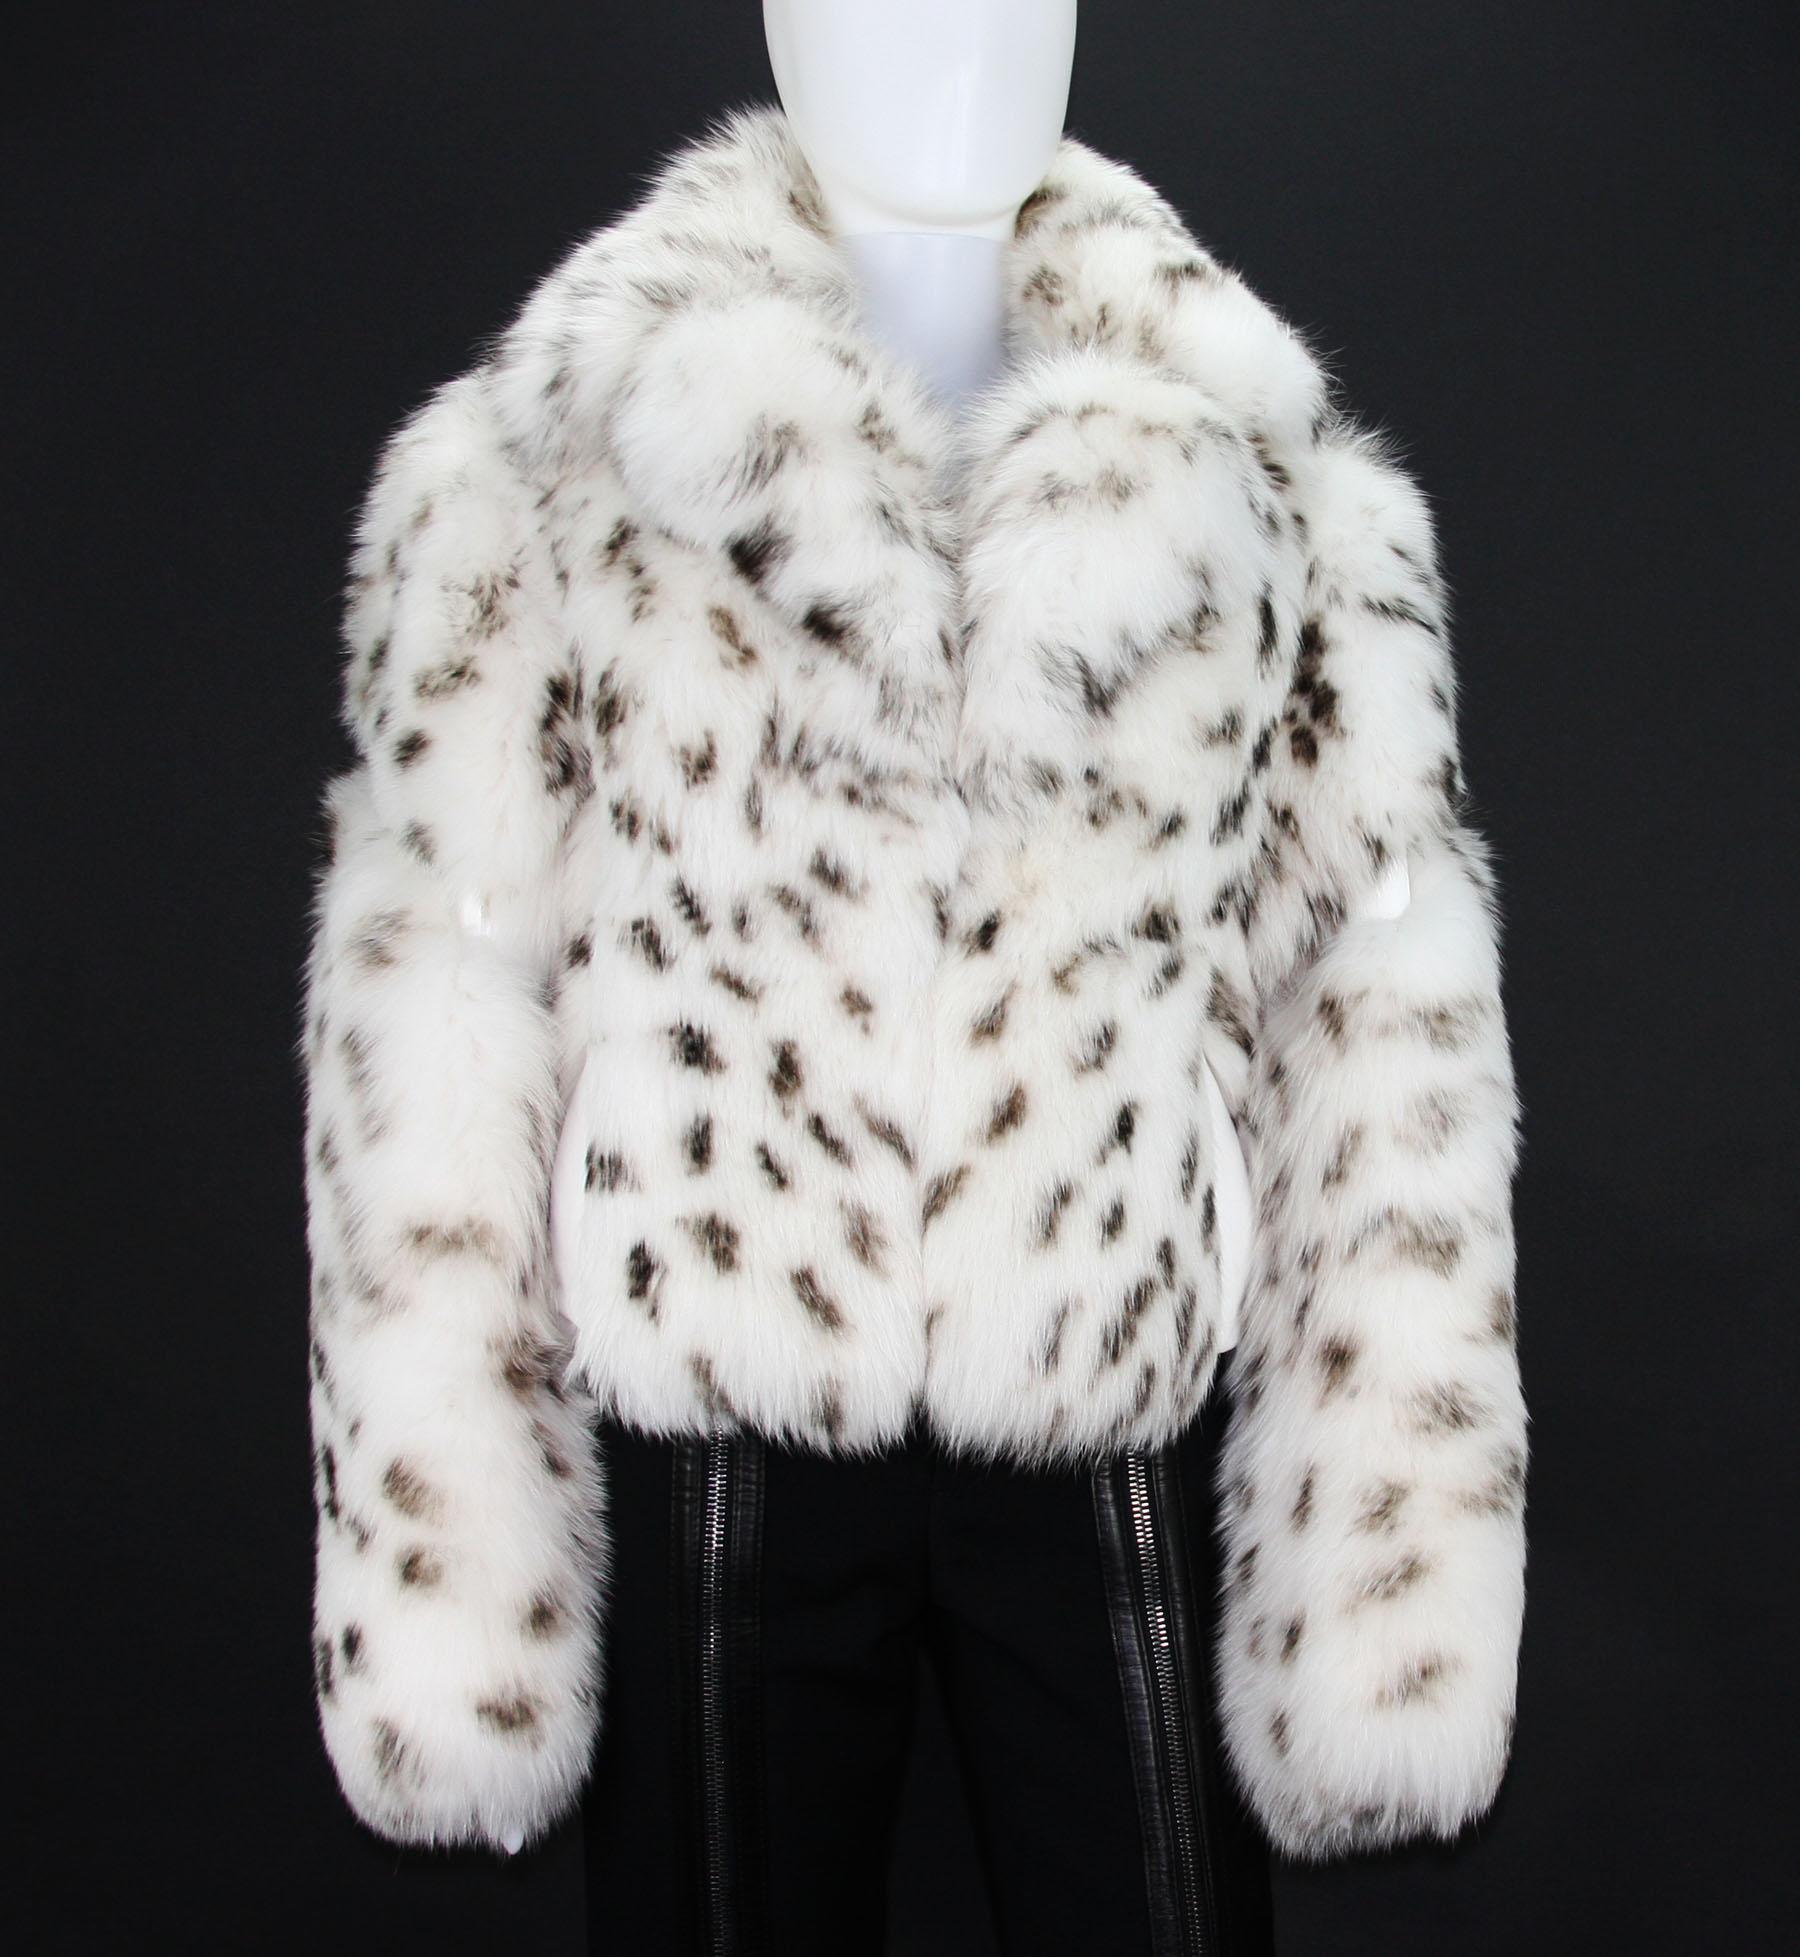 New Versace Collection Women's Fox Leather White Fur Jacket
Designer size 46
100% Real Fox, 100% Leather, Brown Leopard Print Design. White Leather Inserts on Sleeves, Sides and Collar. Fully Lined, Two Side Pockets.
Measurements: Length - 21 inch,